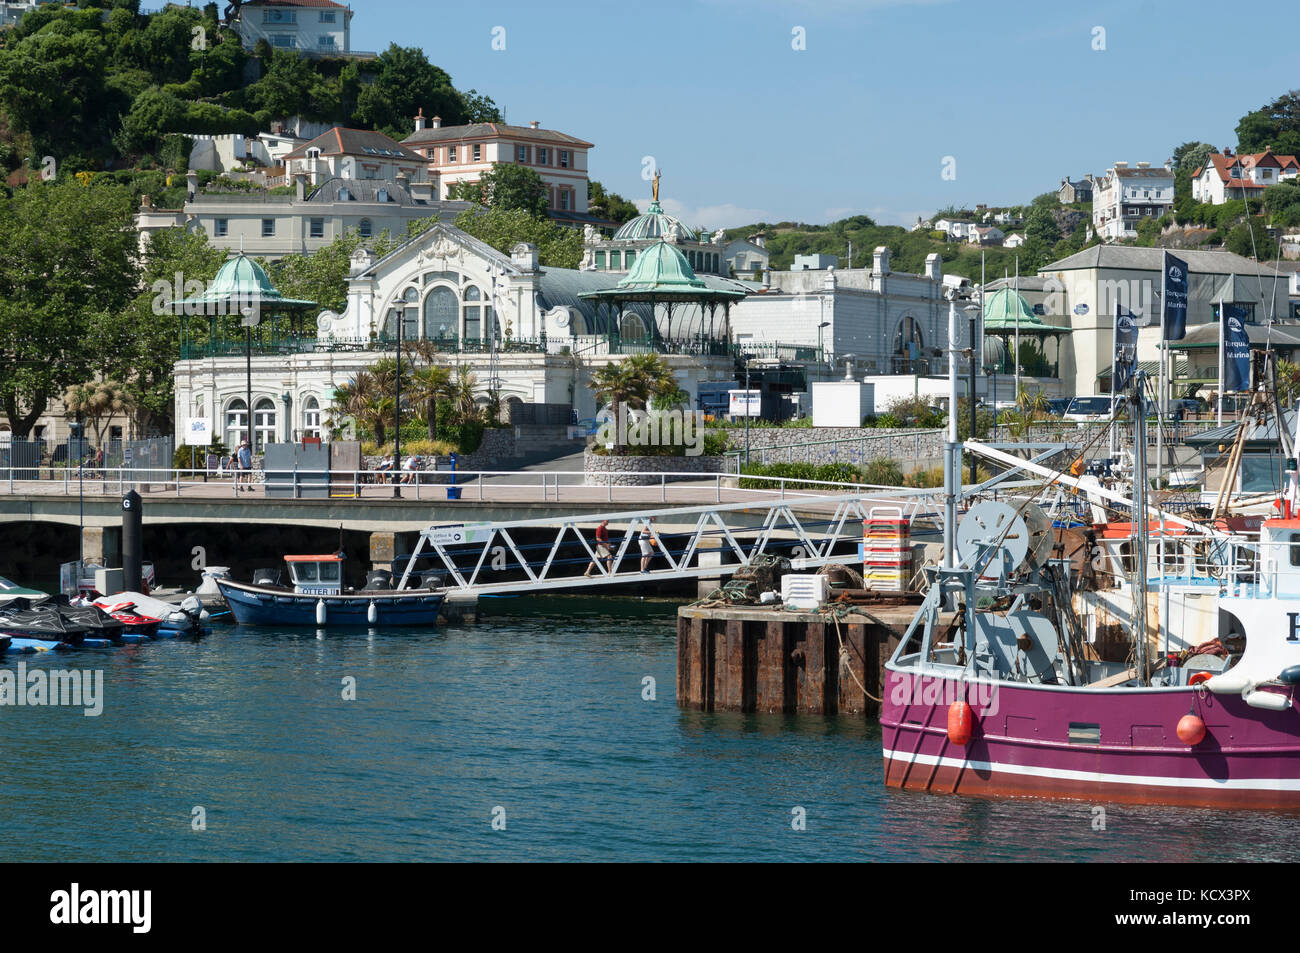 Fishing boat and gear in the harbour and marina at Torquay, Torbay, Devon. Princess Pavilion and promenade, boardwalk, slipway and moorings Stock Photo